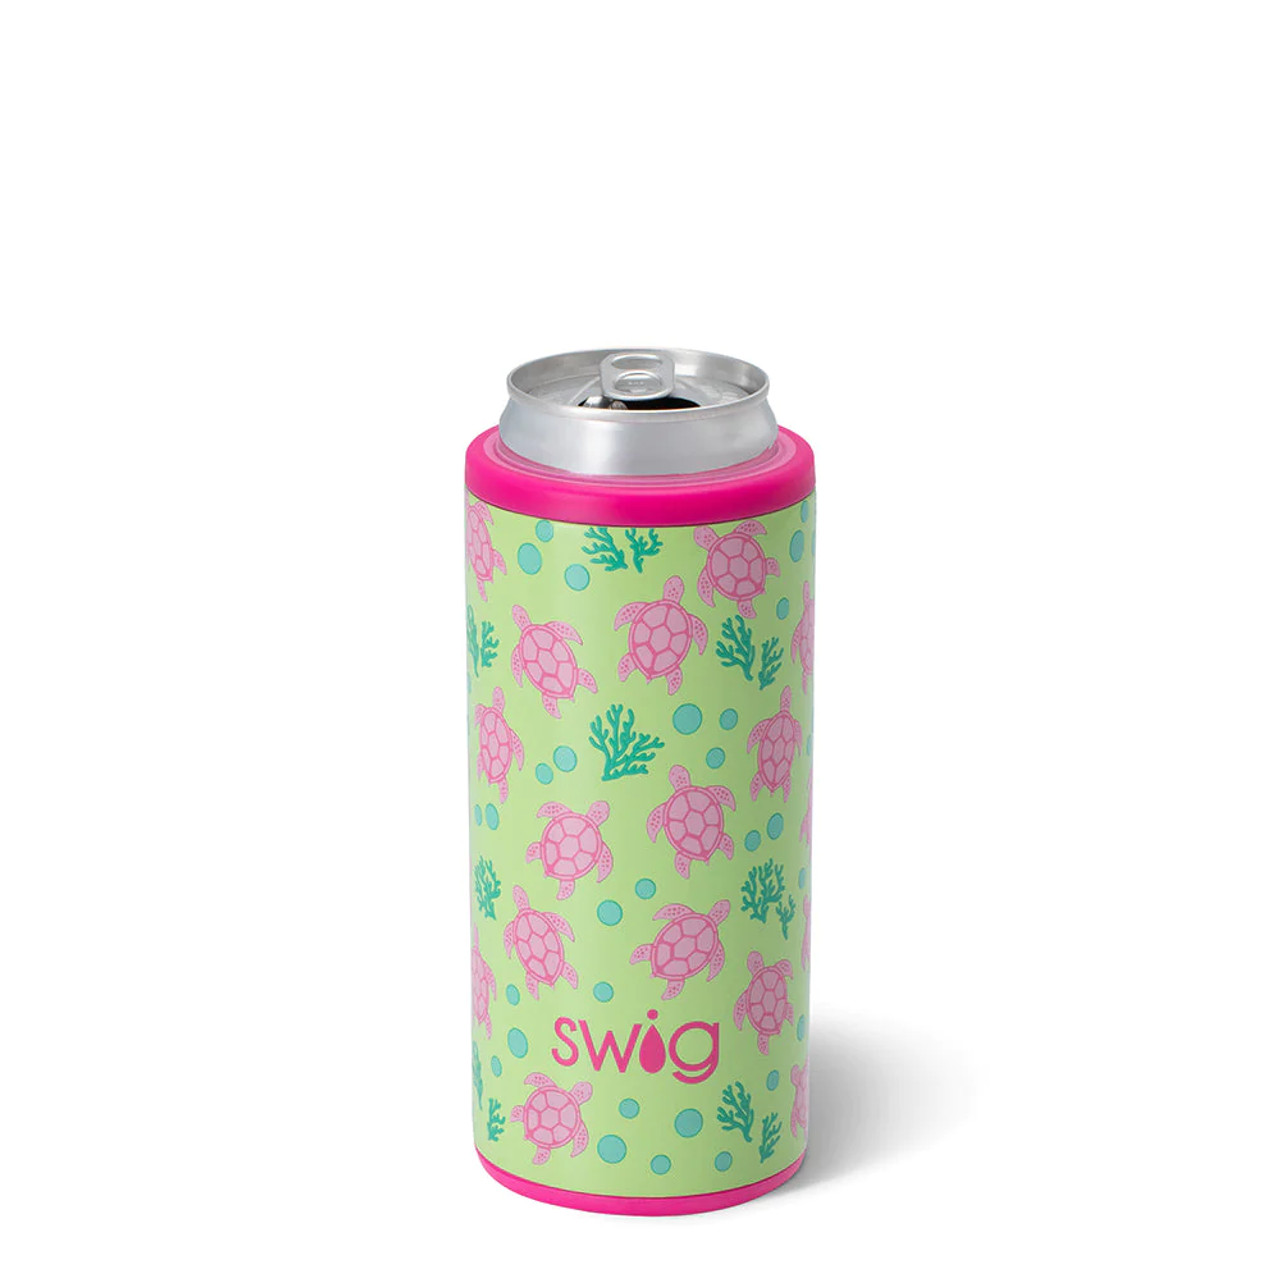 https://cdn11.bigcommerce.com/s-bqmxwbh8/images/stencil/1280x1280/products/2490/7399/swig-life-signature-12oz-insulated-stainless-steel-skinny-can-cooler-sea-turtle-main_1__72319.1680291440.jpg?c=2